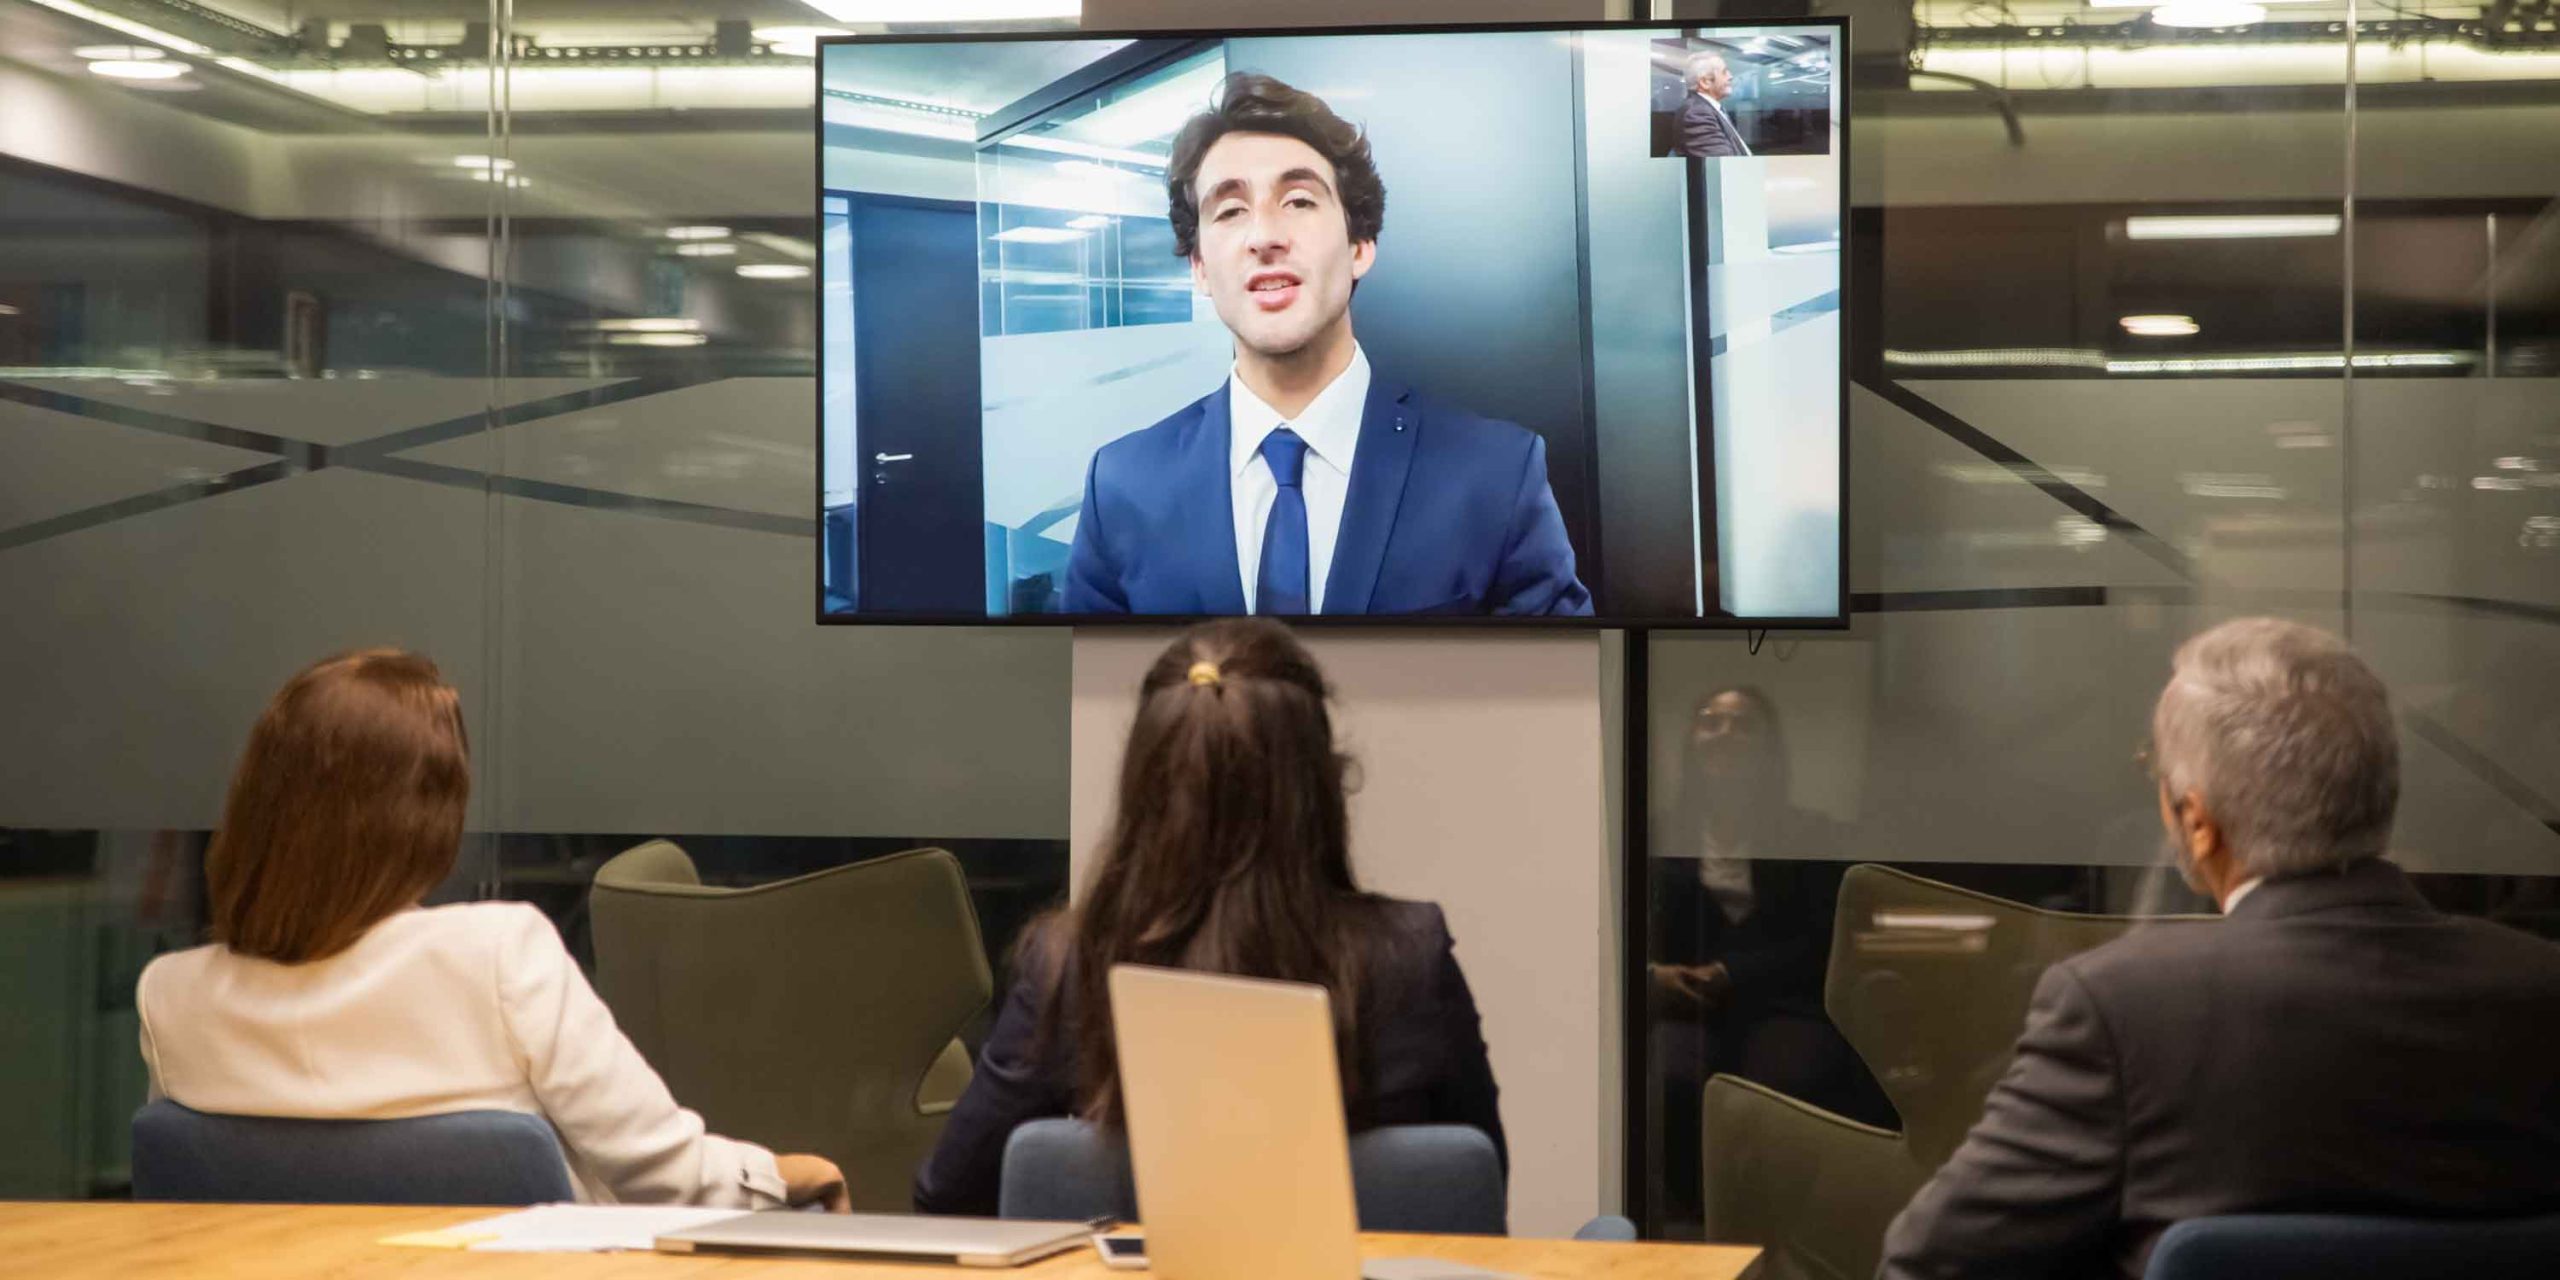 group of people listening to businessman during video conference